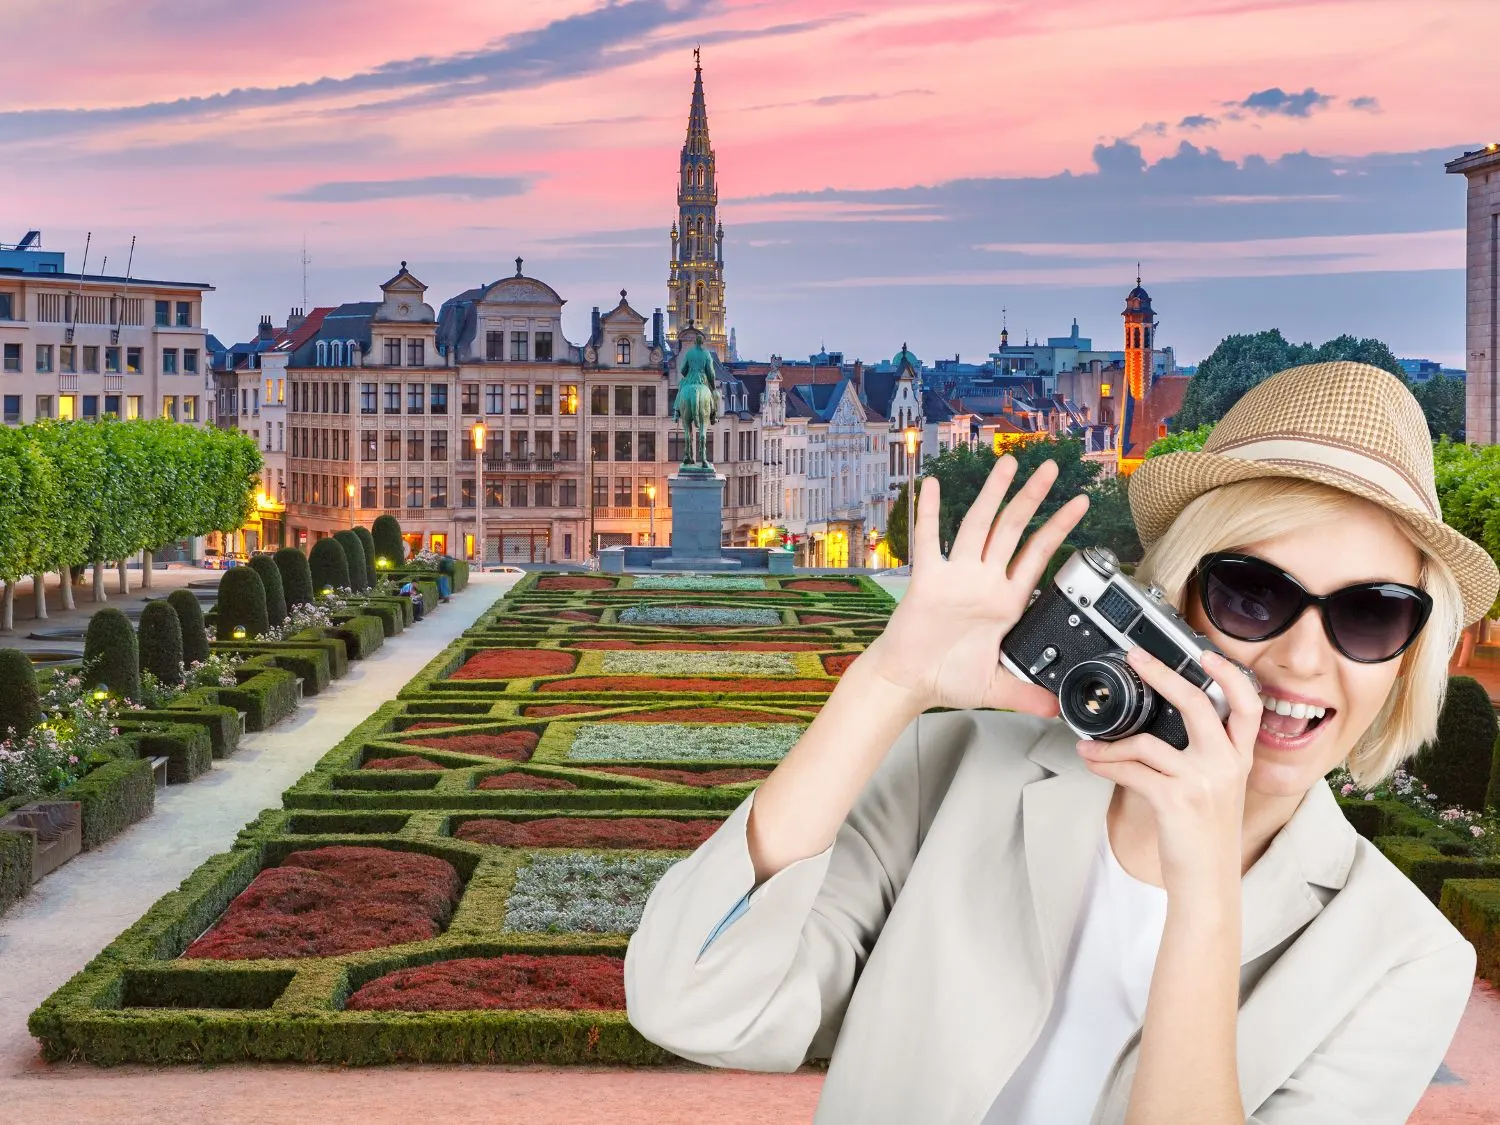 The 6 Best Belgium Tours For Unforgettable Adventures That Are Achievable & Affordable